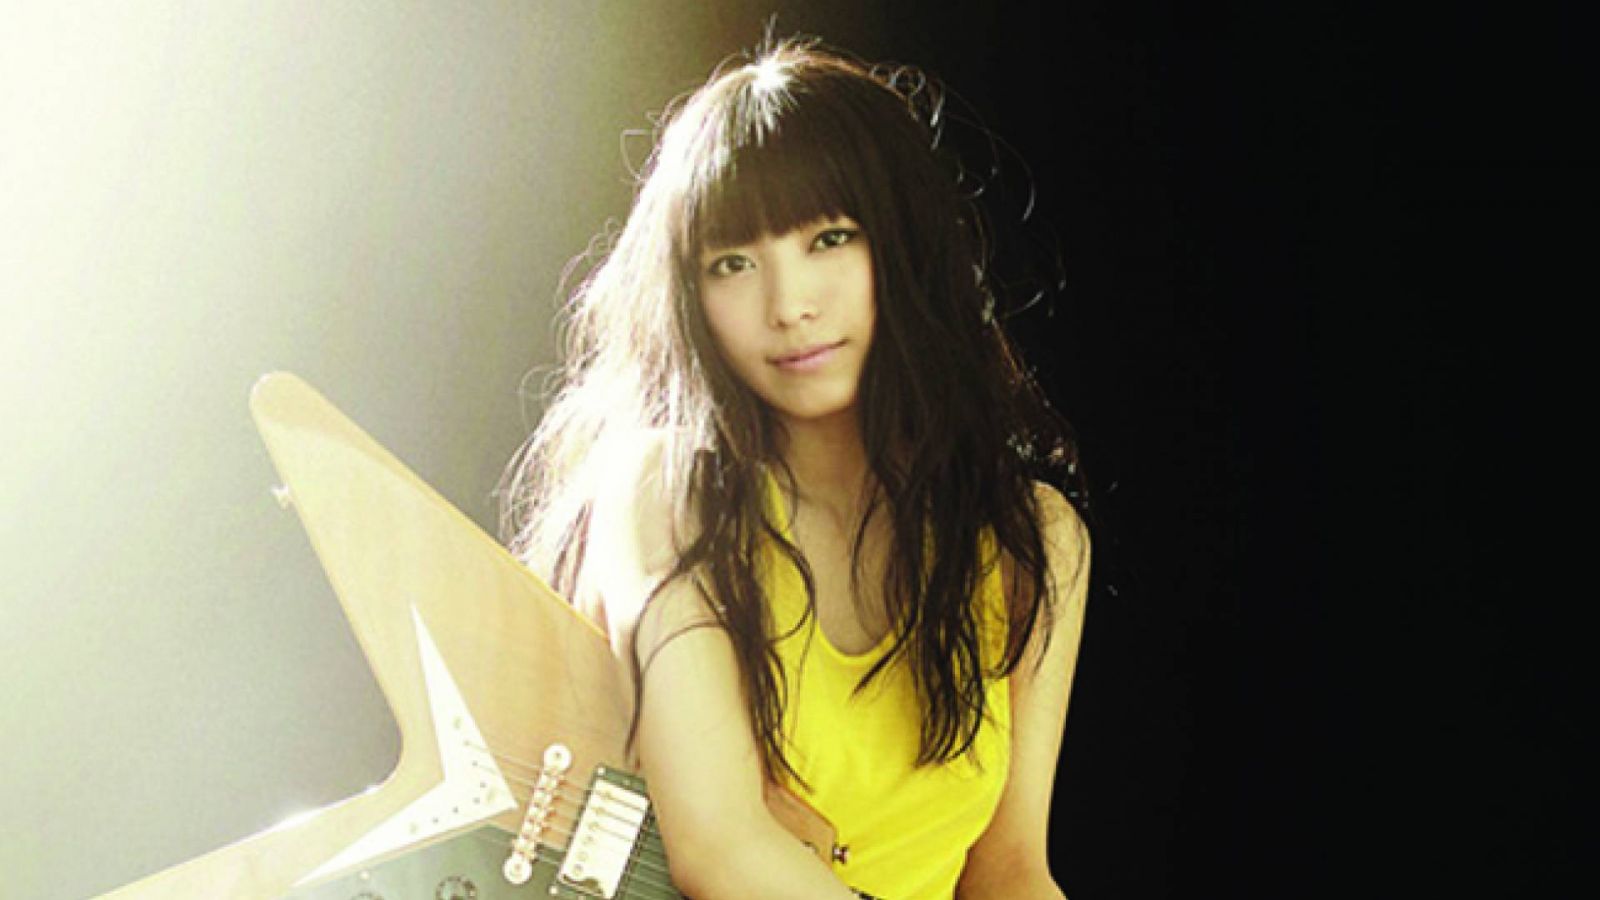 New Album from miwa © miwa - All Rights Reserved